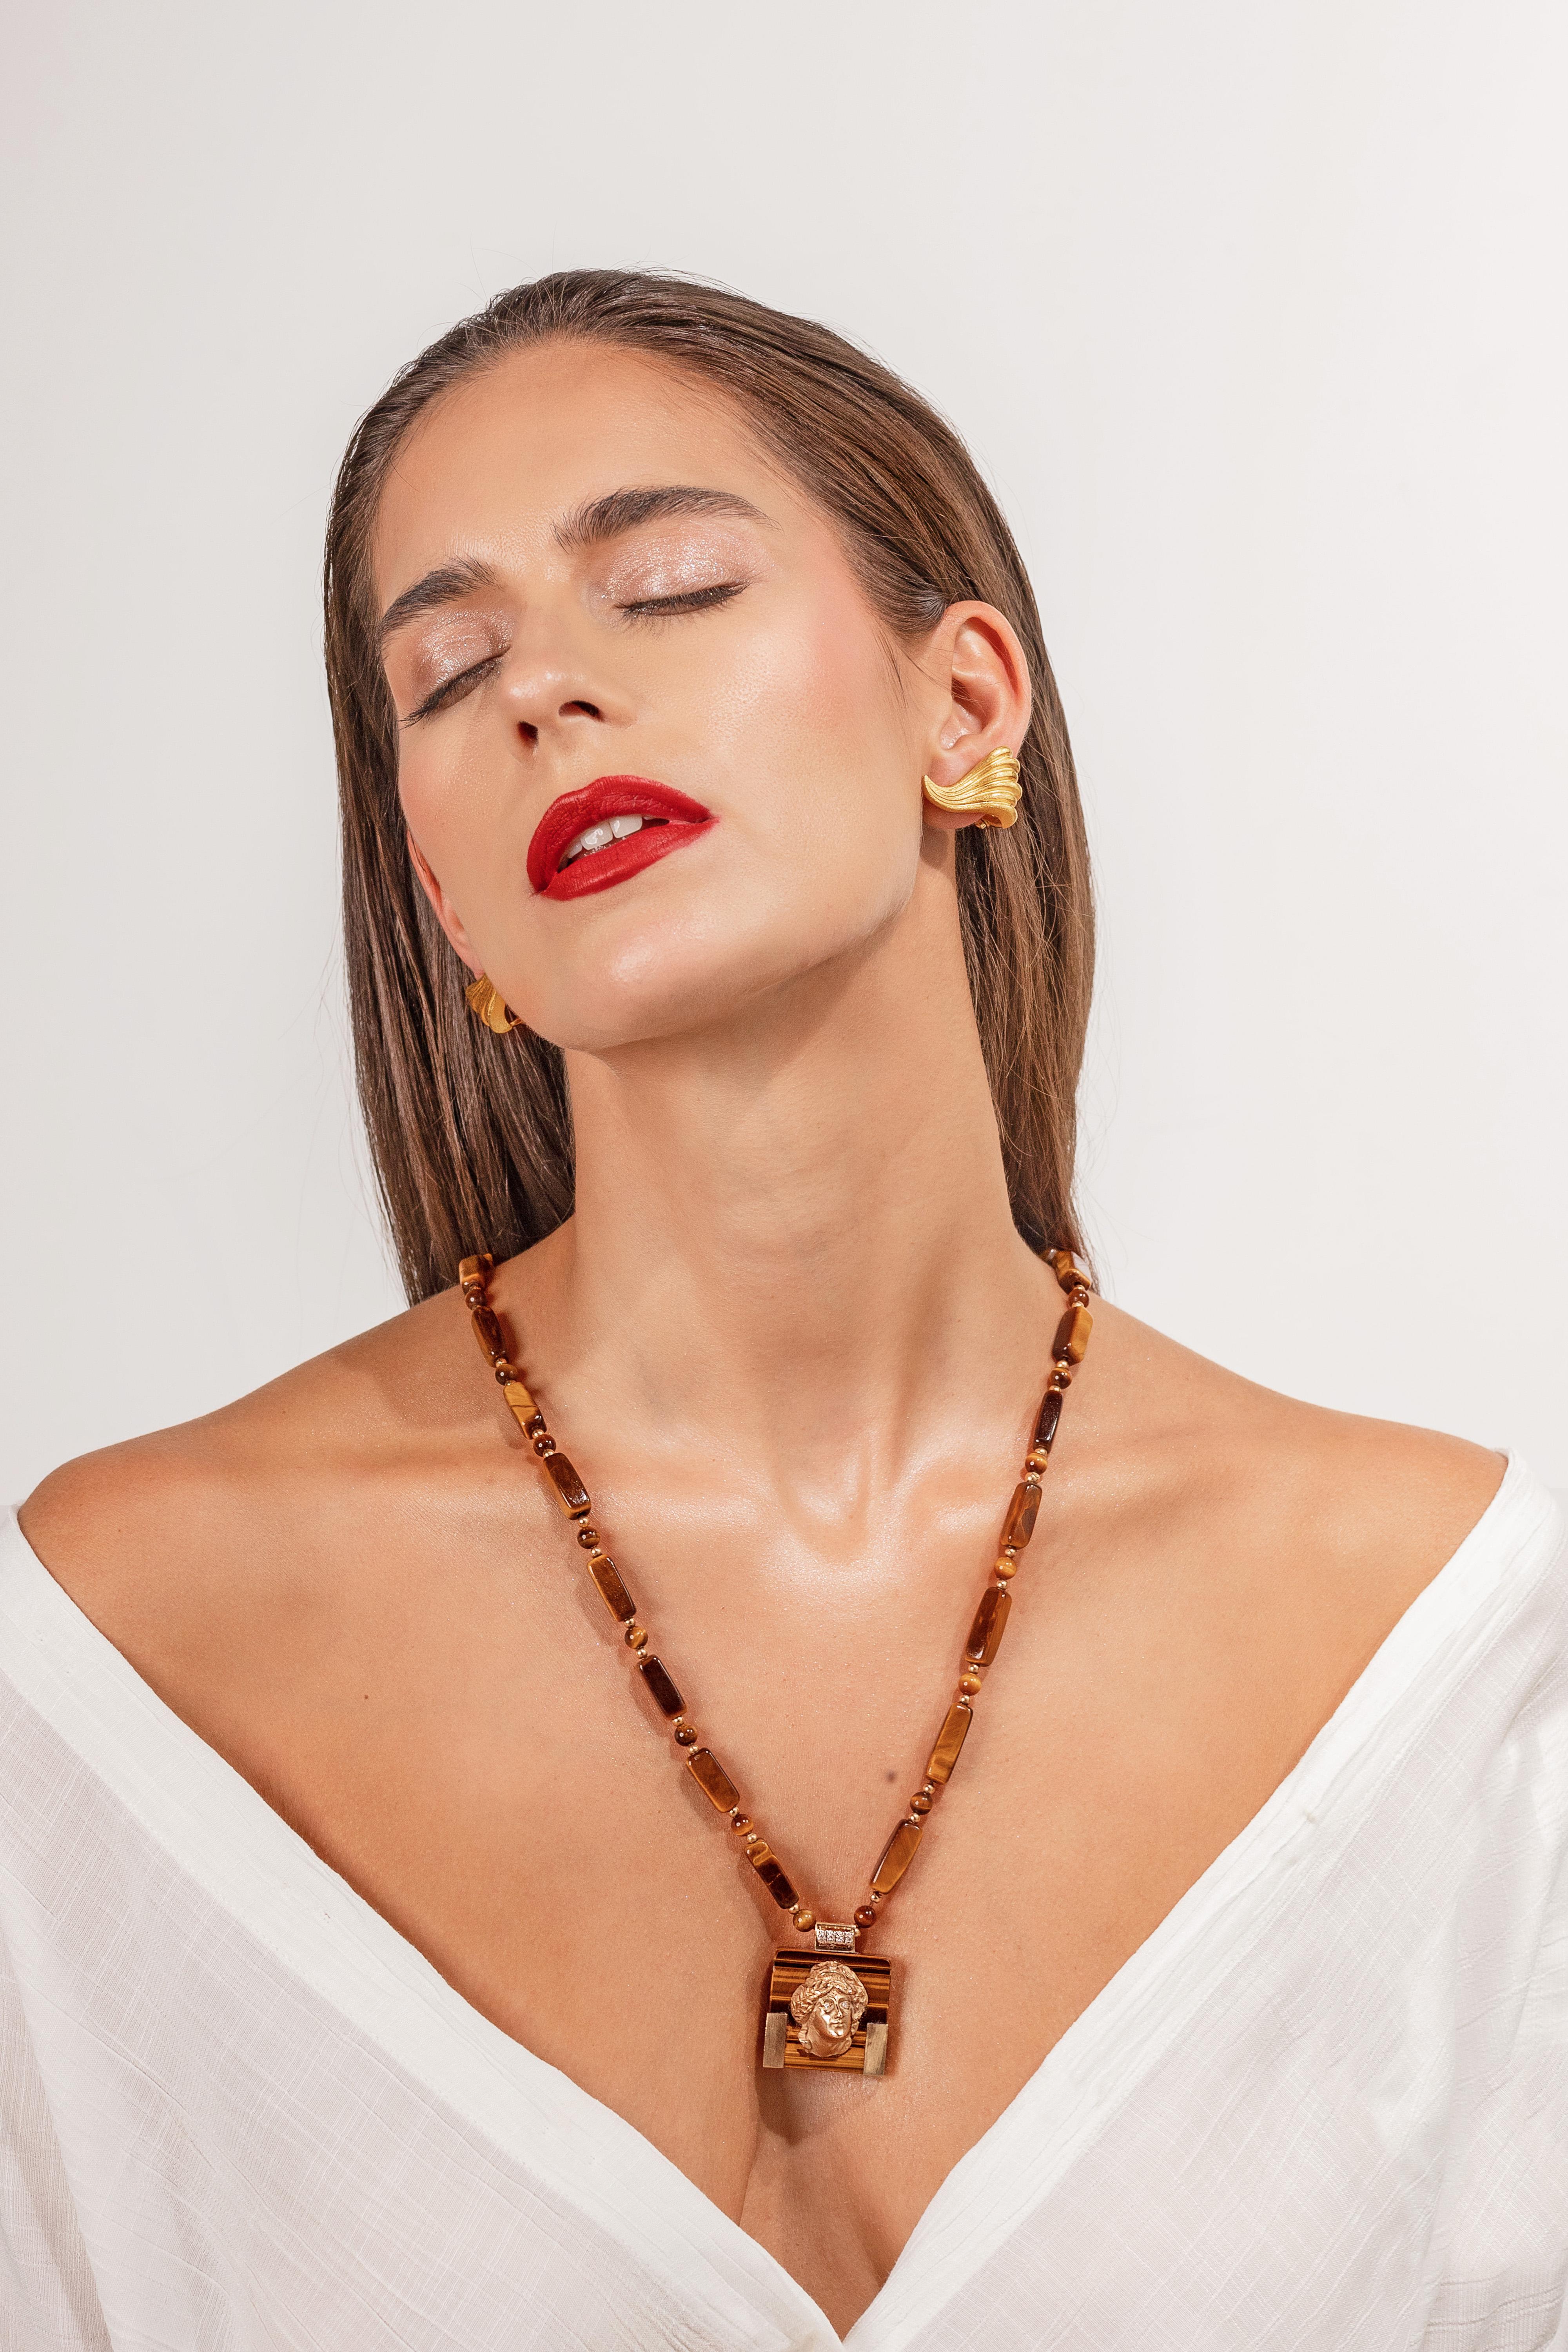 Contemporary Tiger Eye Necklace With Articulated 14ct Gold Portrait Pendant For Sale